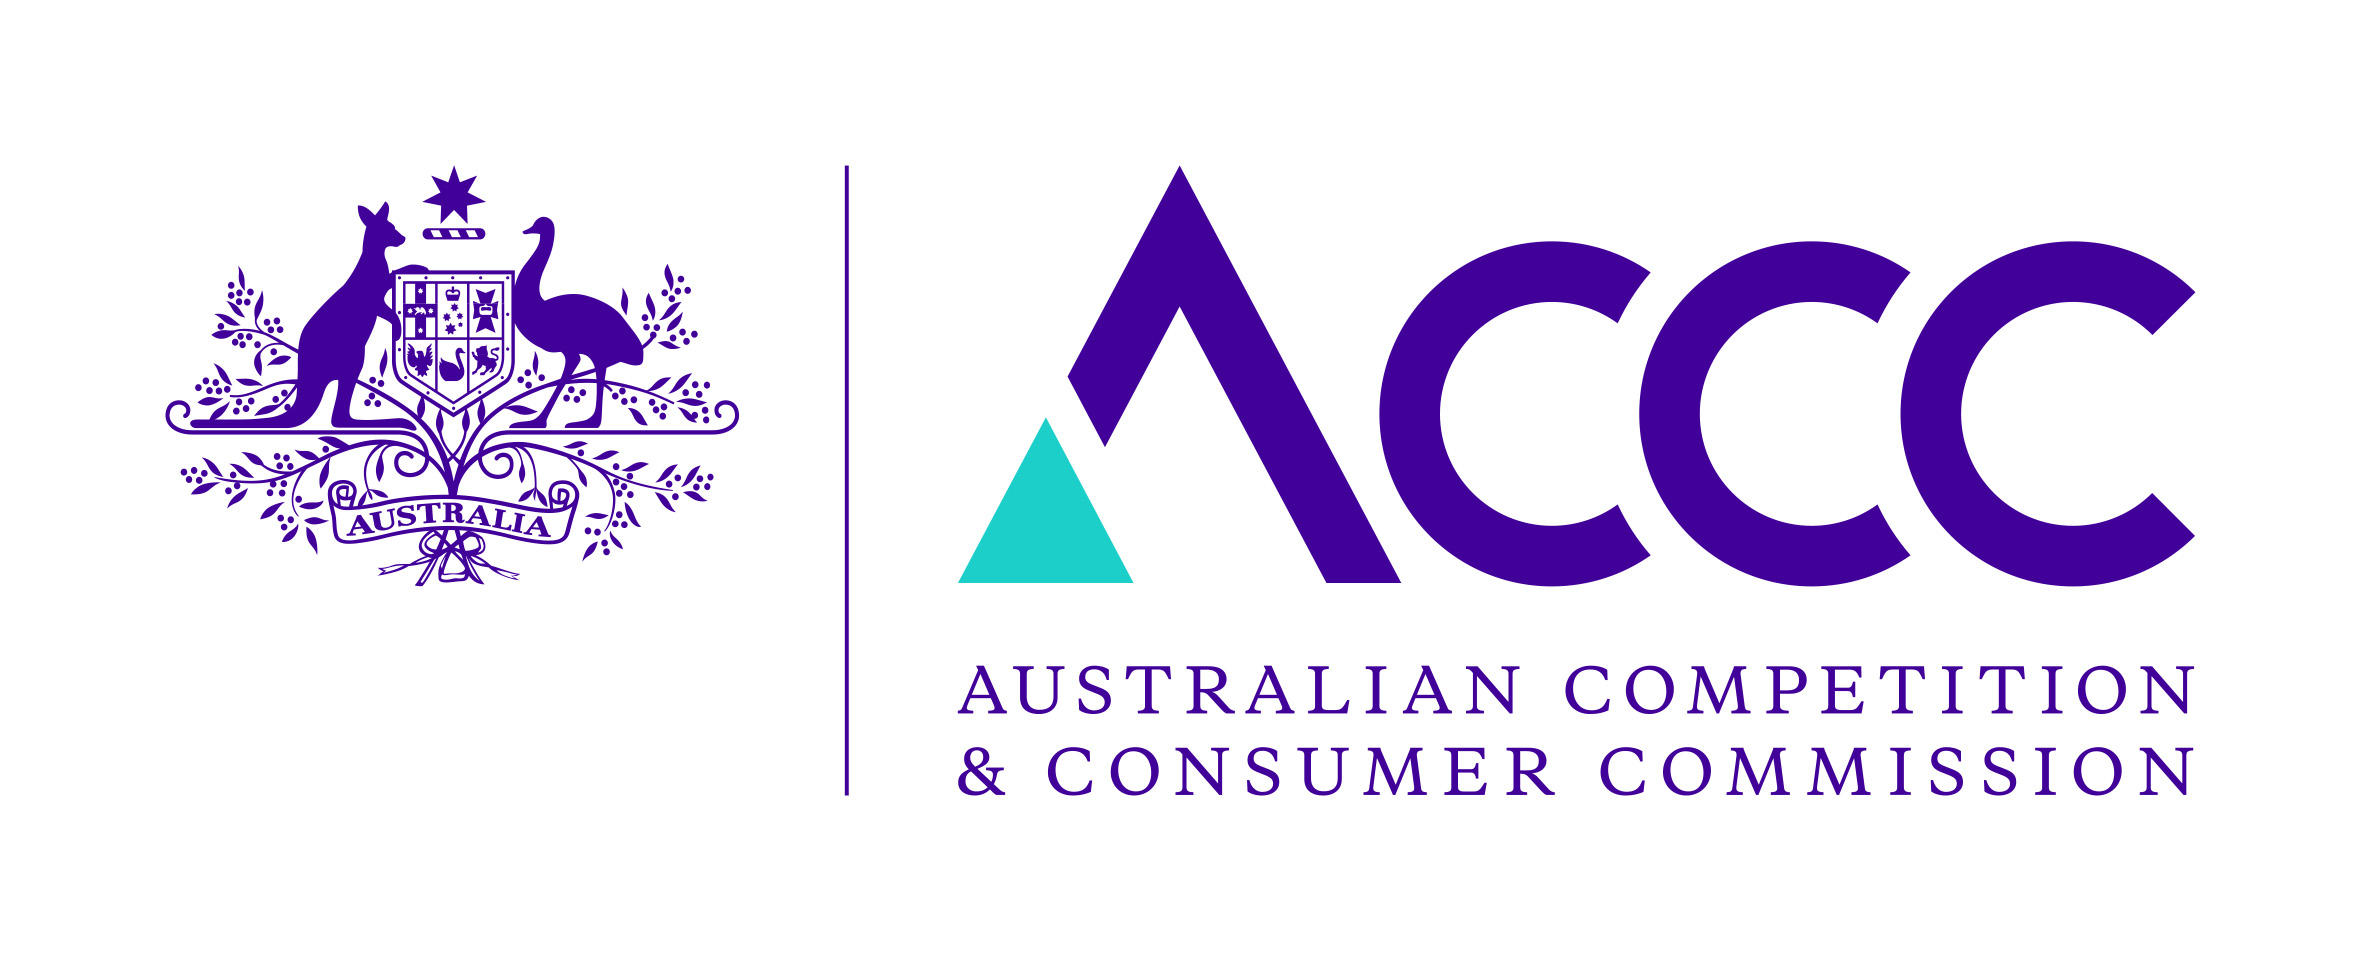 Australian-Competition-and-Consumer-Commission-ACCC-logo